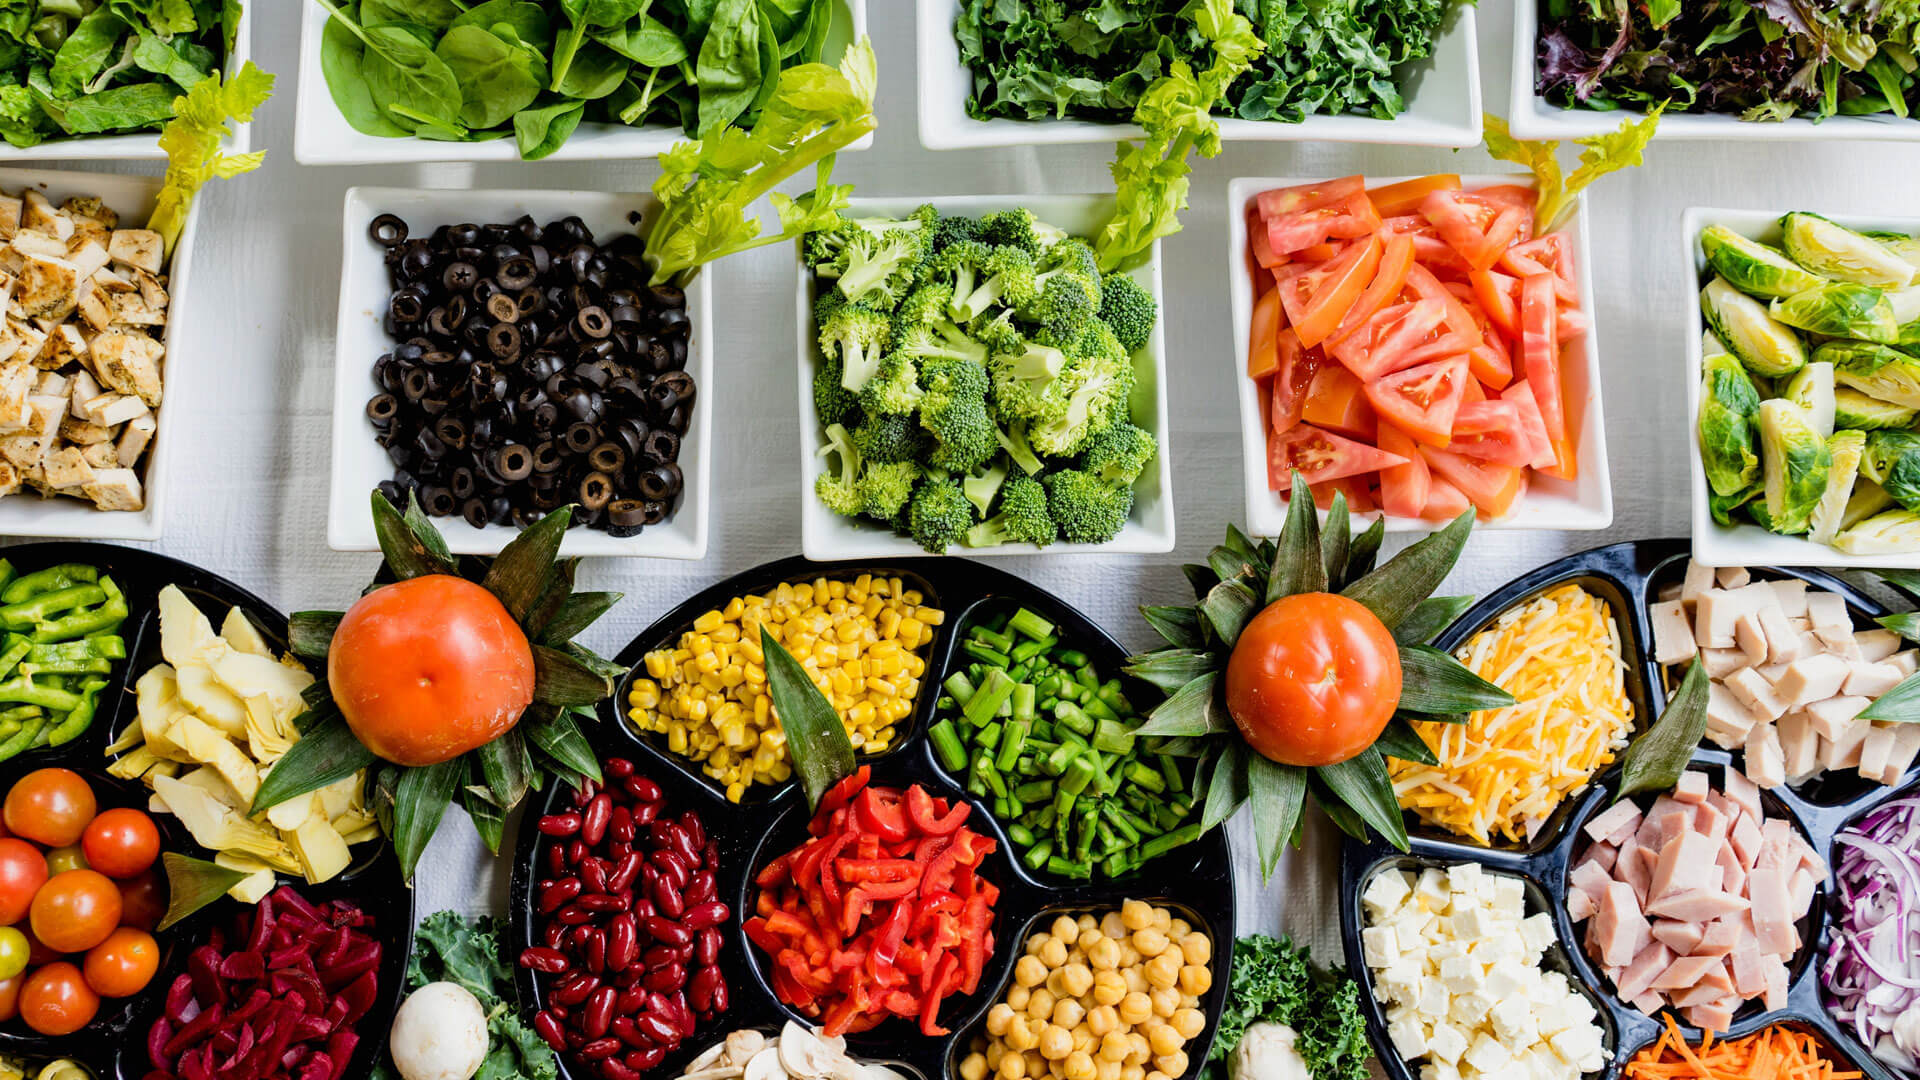 EatWell prescribes meal kits to prevent chronic diseases